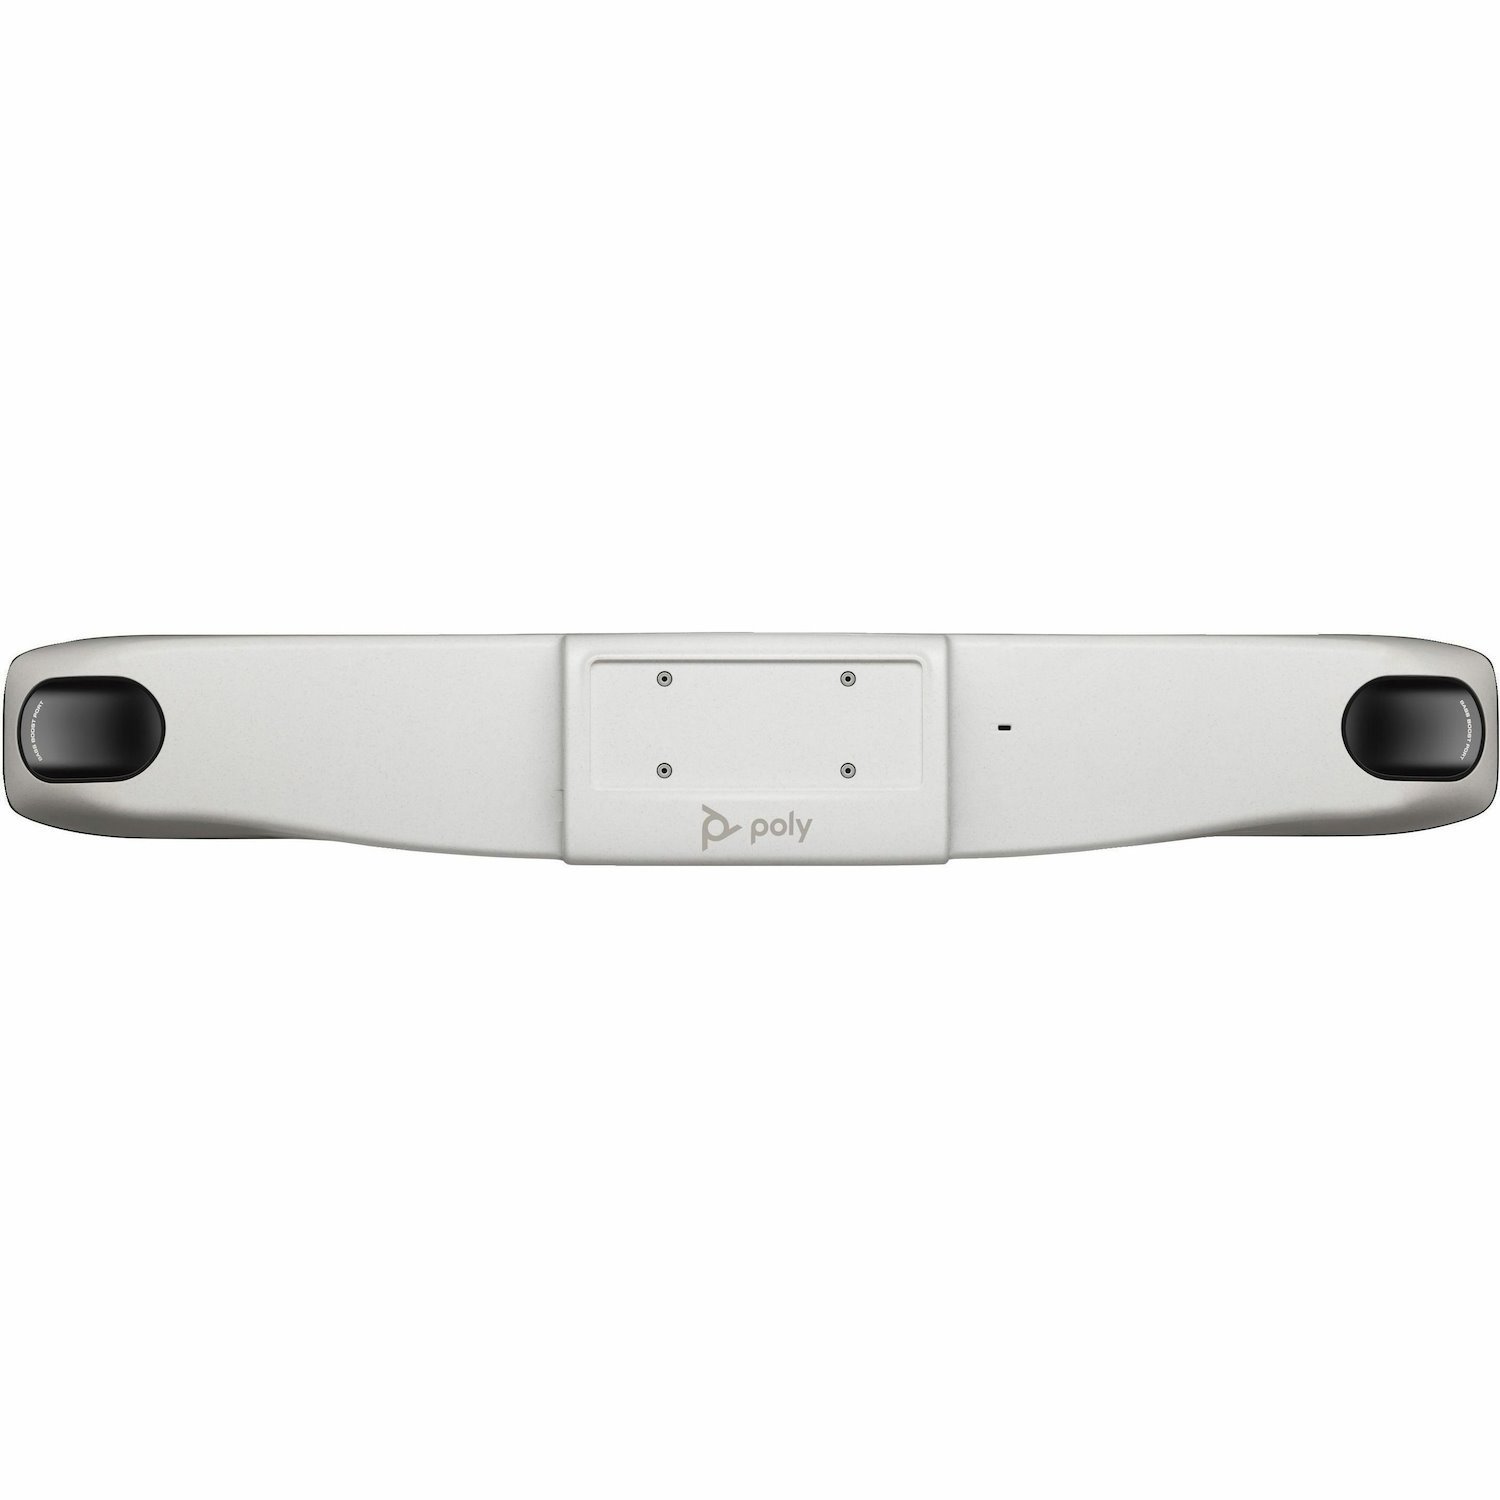 Poly Studio X70 Video Conference Equipment for Large Room(s) - TAA Compliant